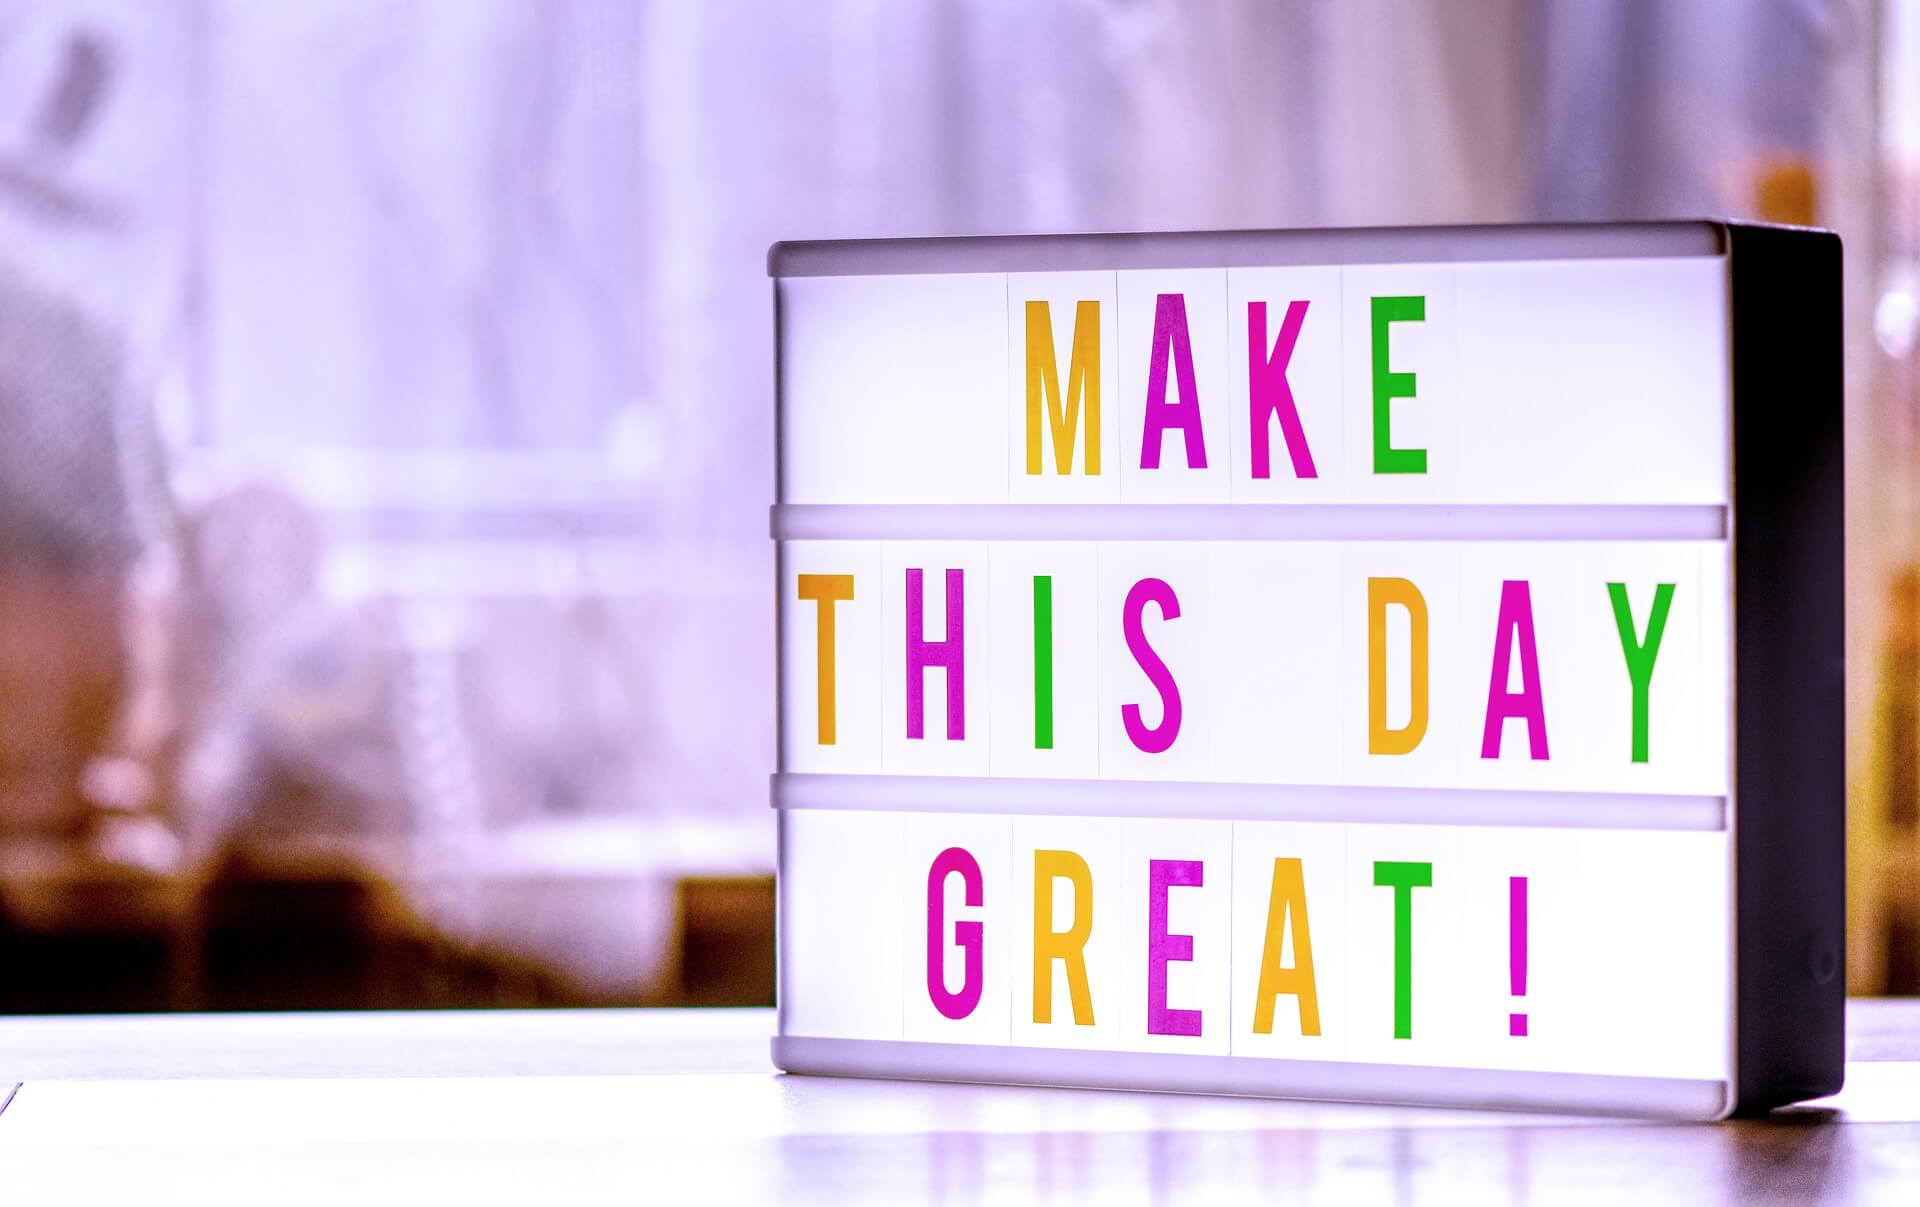 MAKE THIS DAY GREAT!